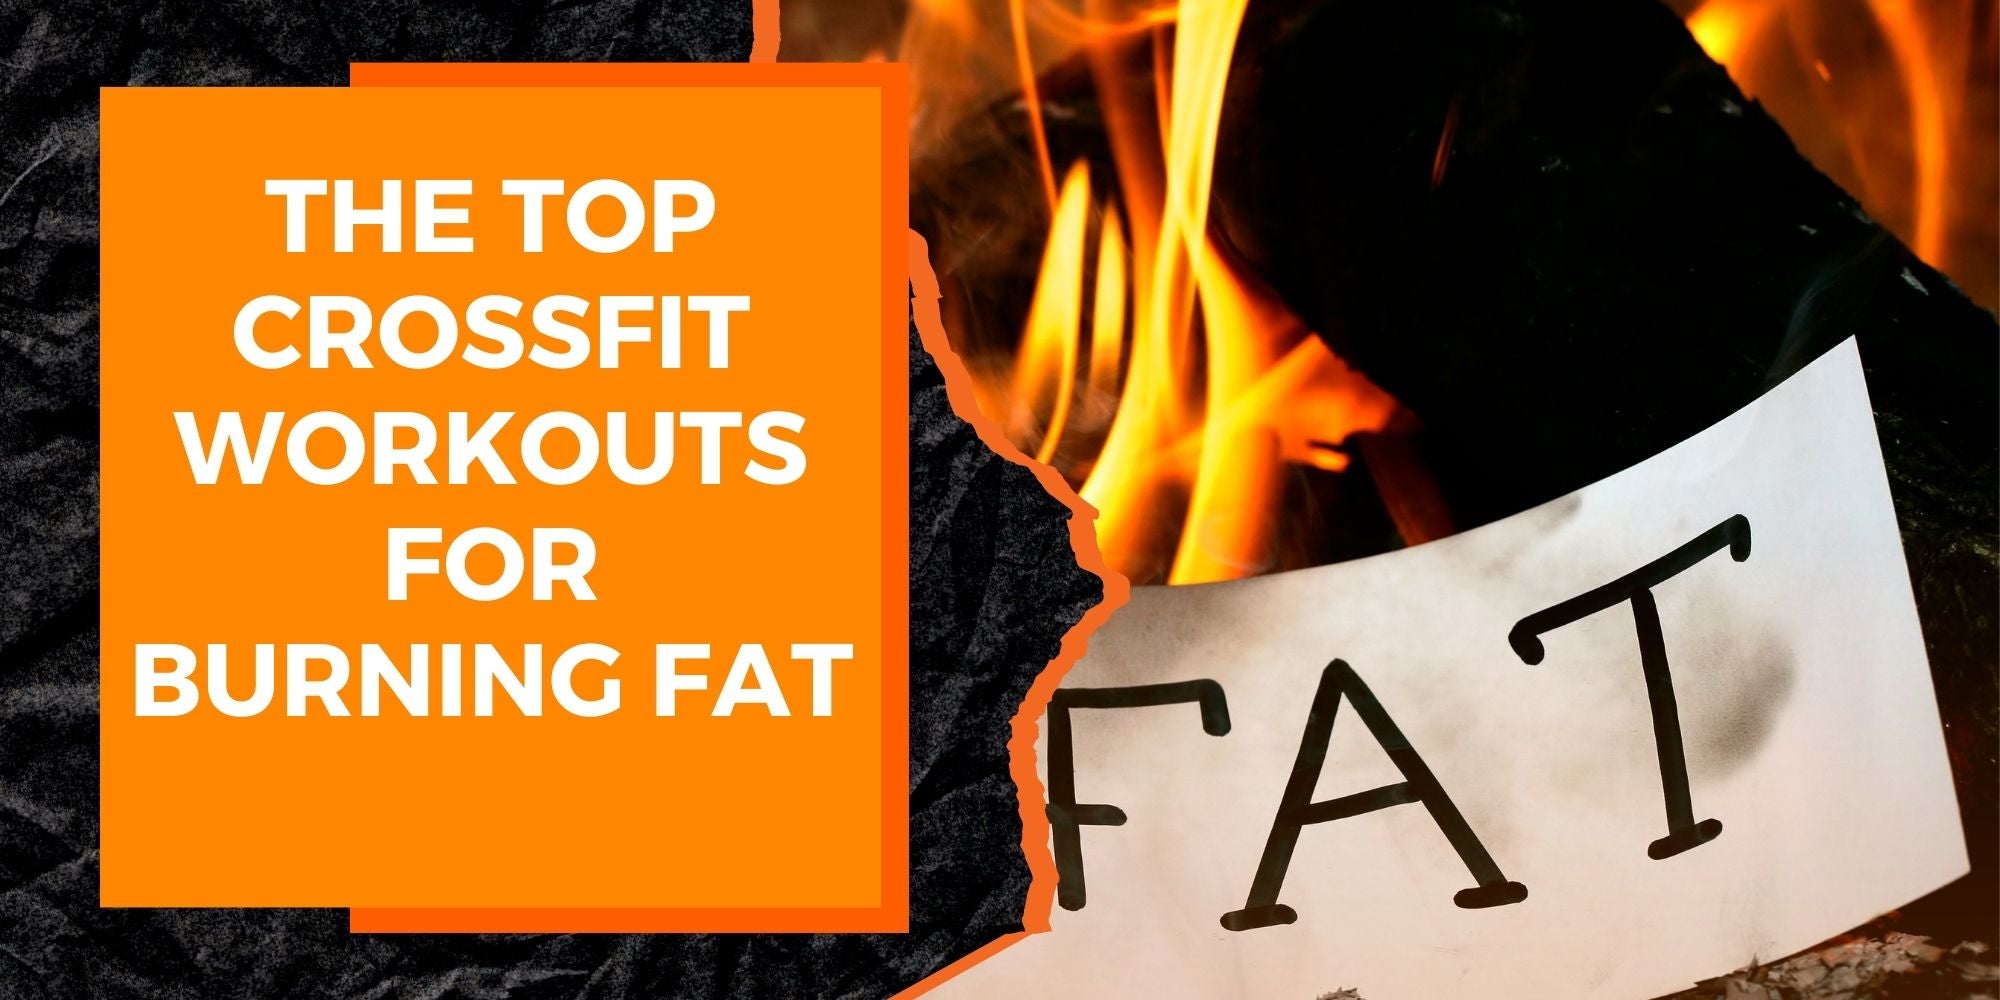 The Top CrossFit Workouts for Burning Fat